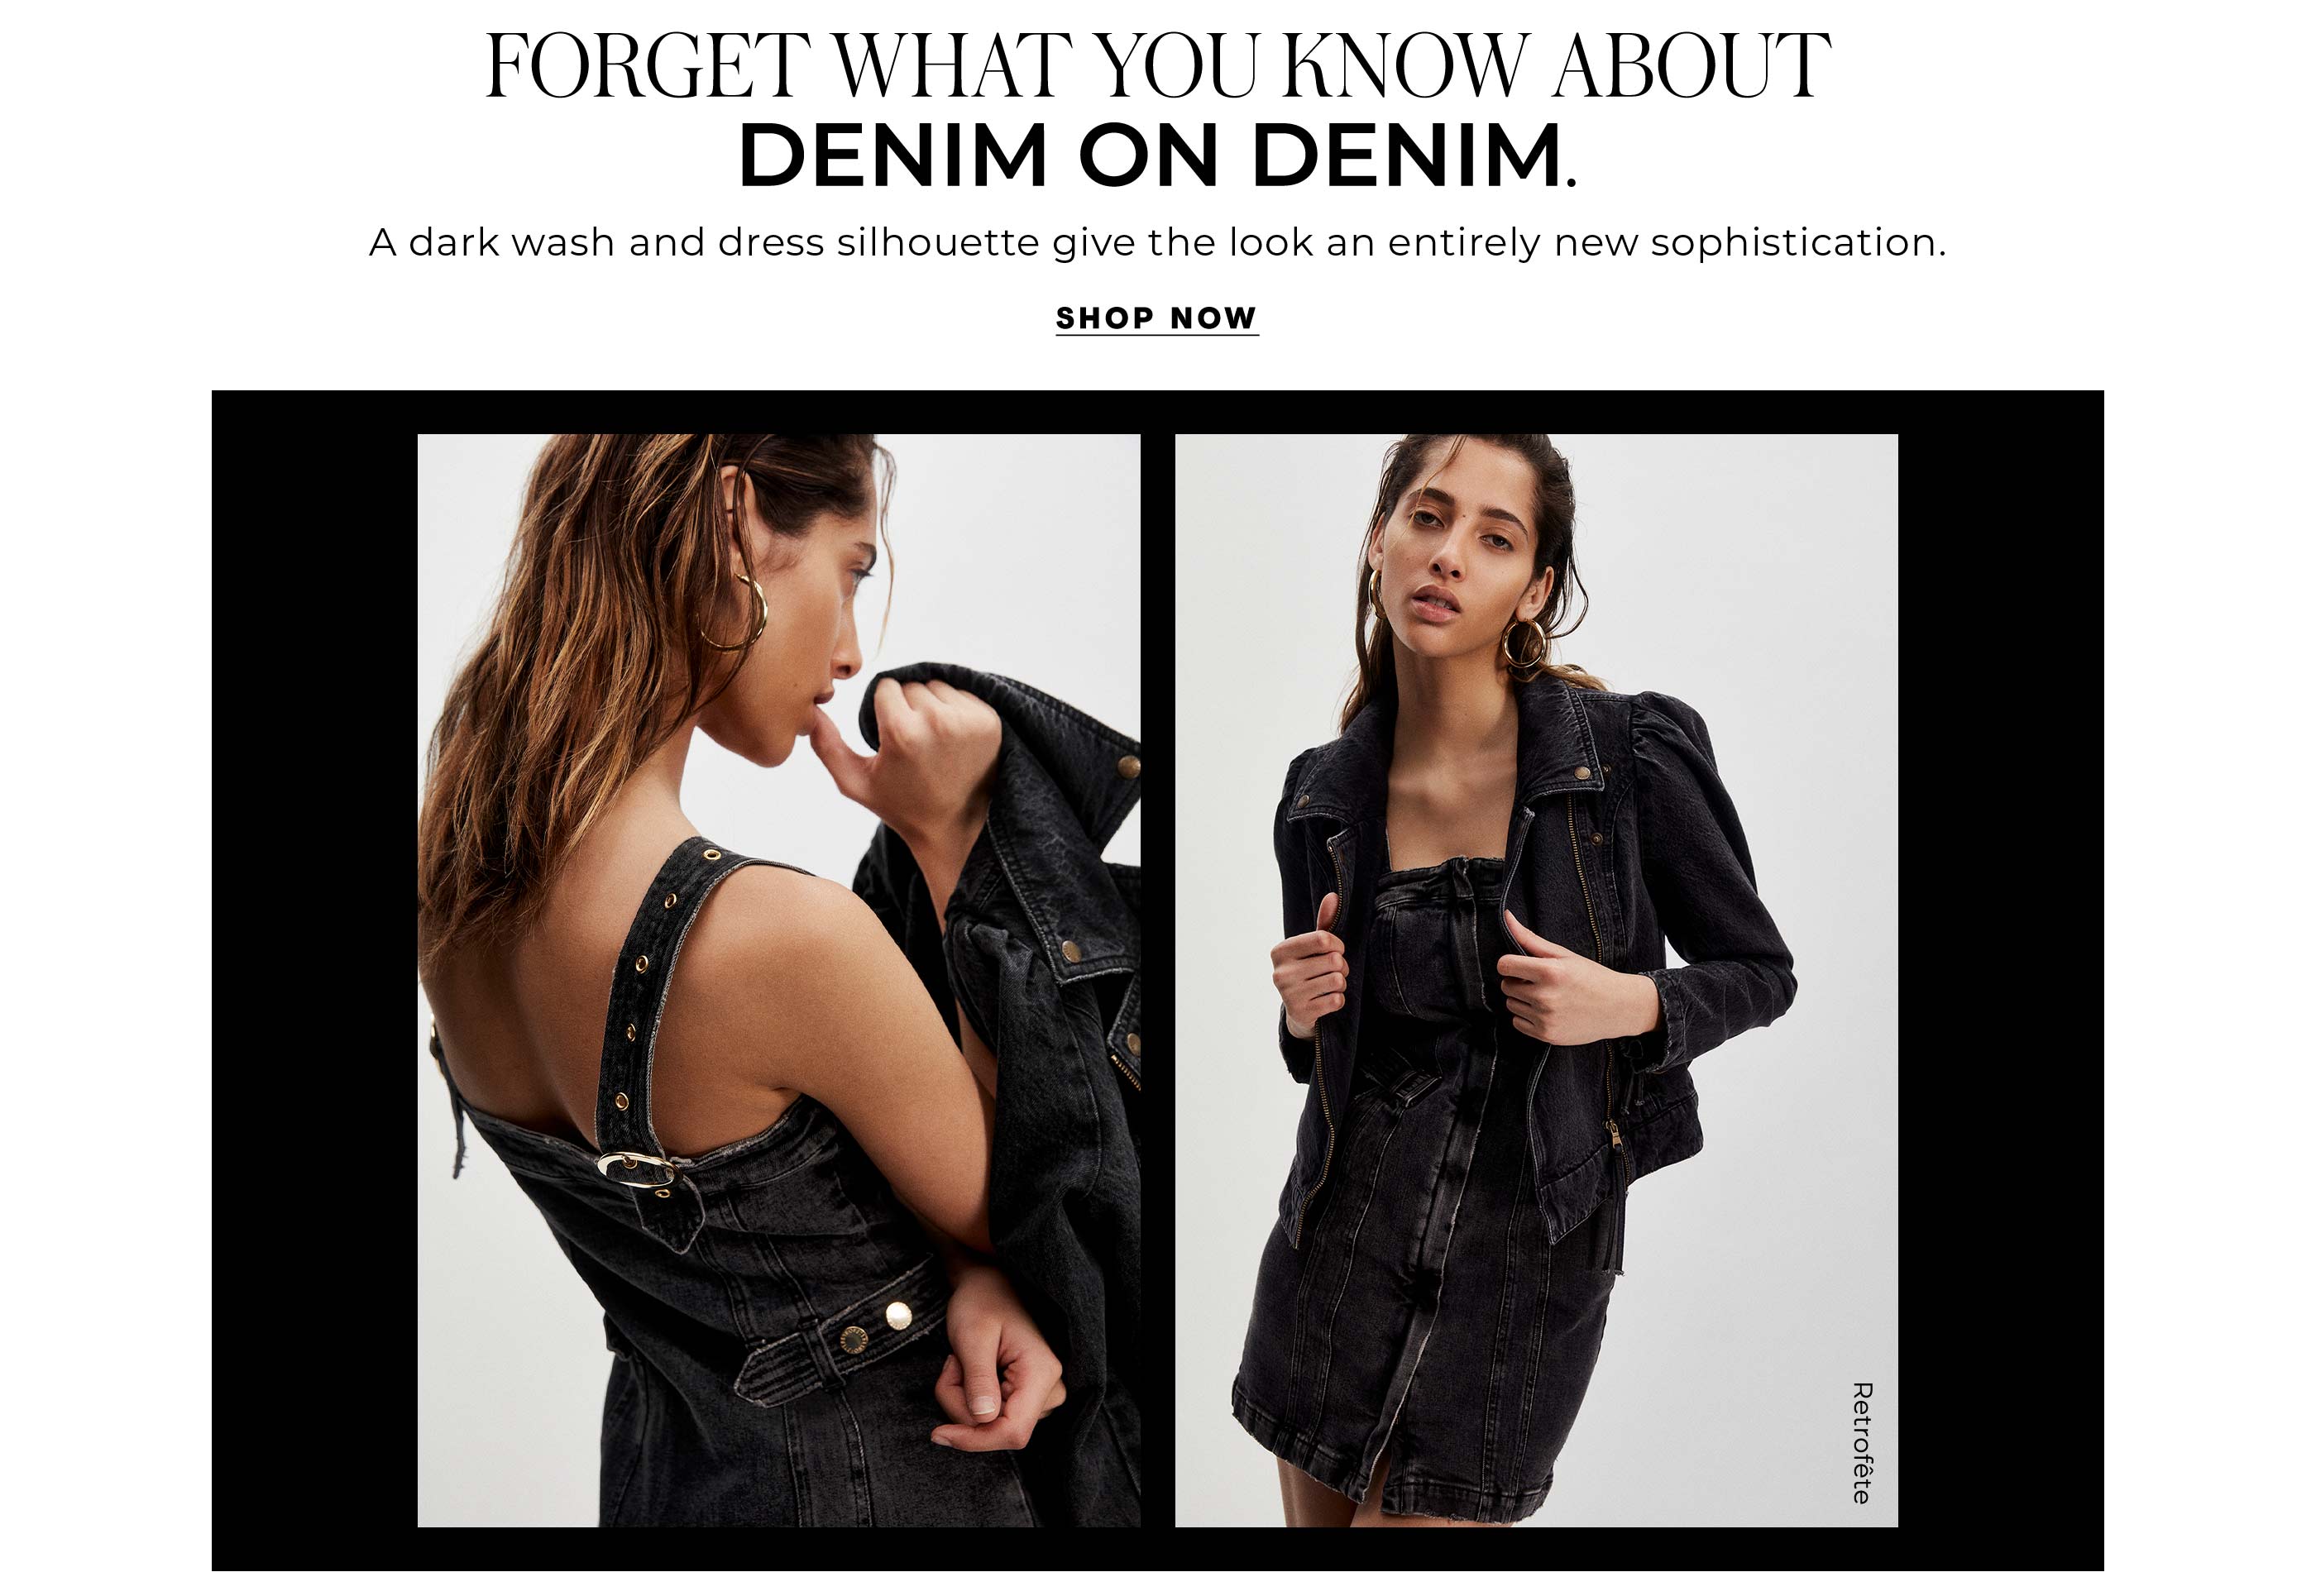 "Forget What You Know About Denim On Denim. A dark wash and dress silhouette give the look an entirely new sophistication."